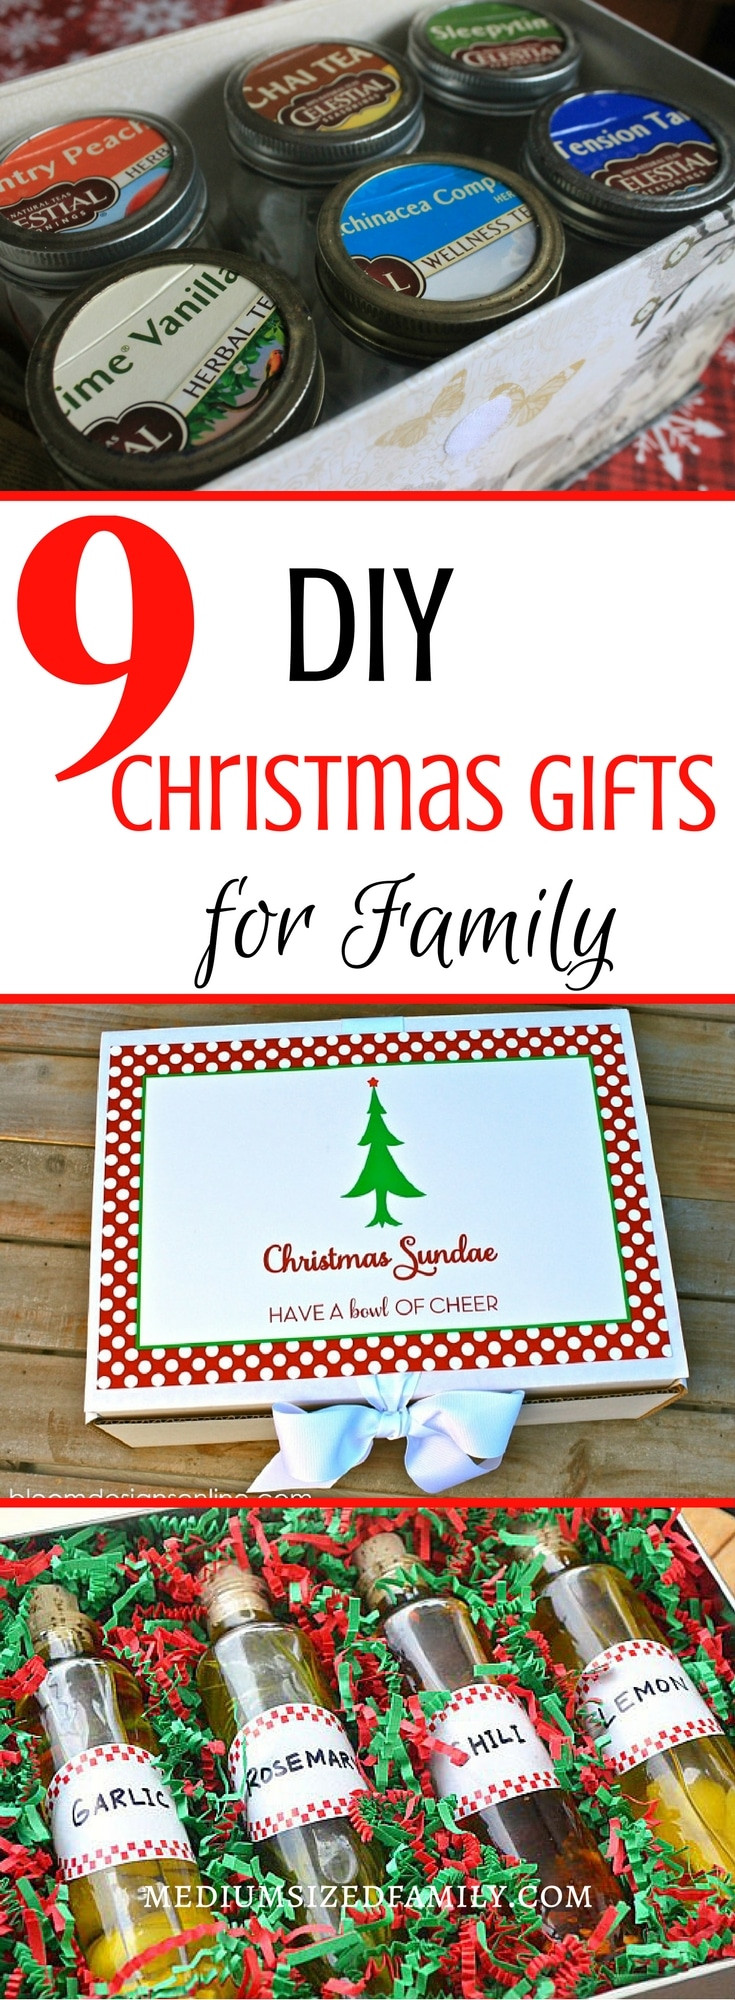 DIY Christmas Gifts For Family
 7 Ways to Pile Up Christmas Money Do It Yourself